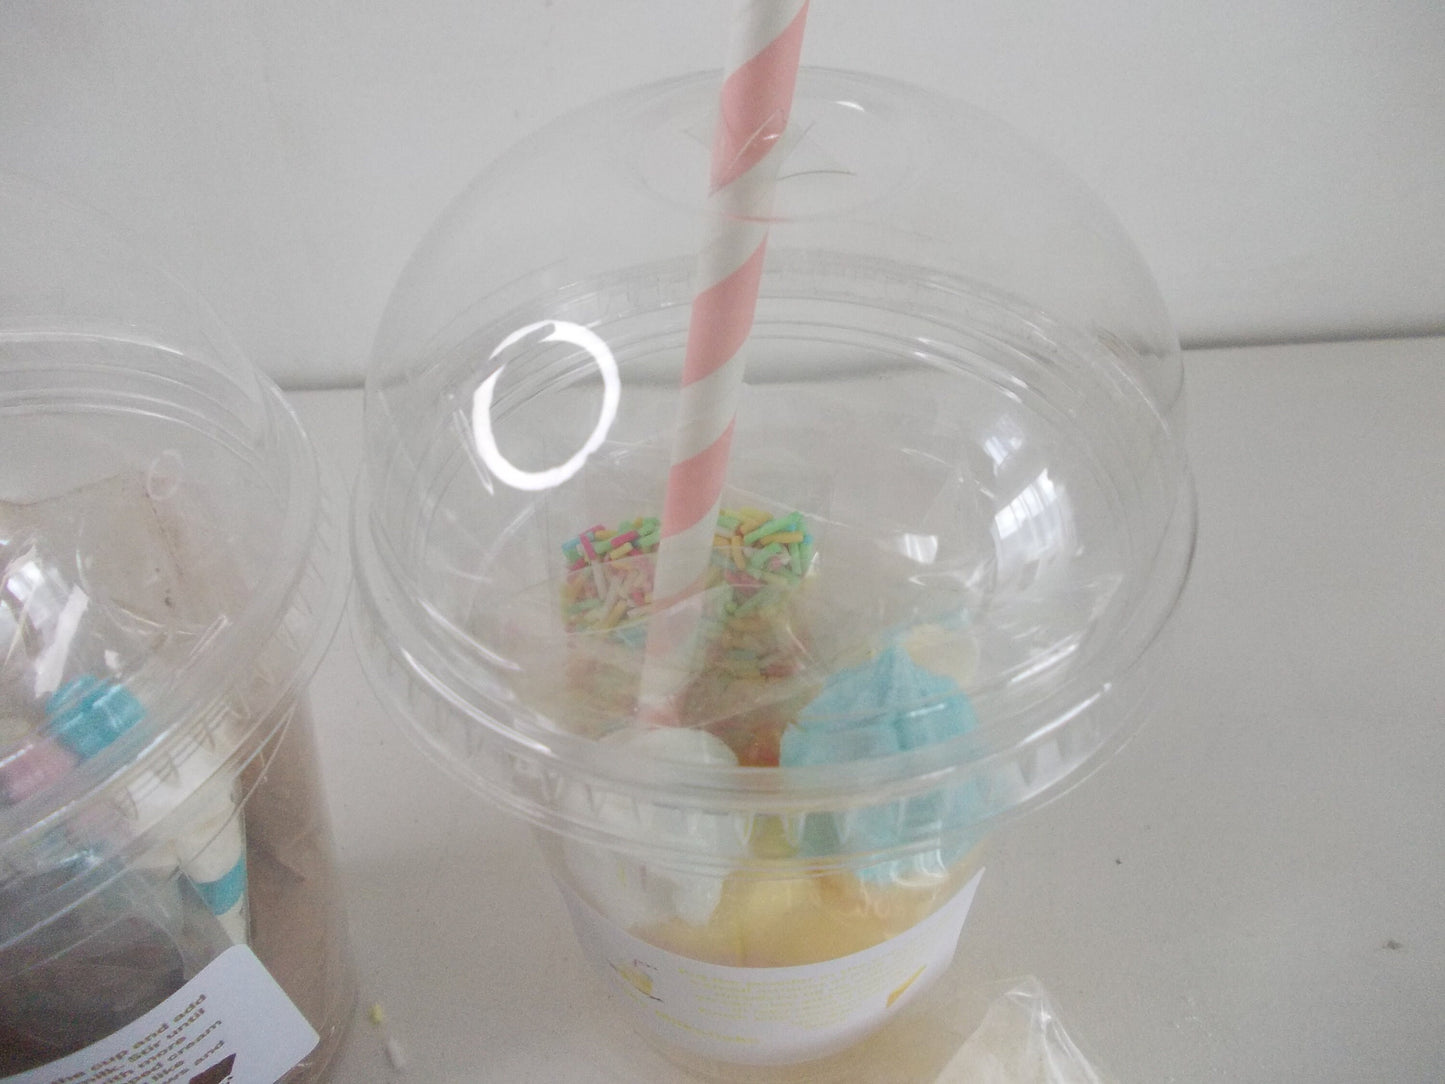 Milkshake in a cup kit for kids,  4 flavours for milk shake lovers to chose from, make your own milkshake party favour, craft  kit for kids